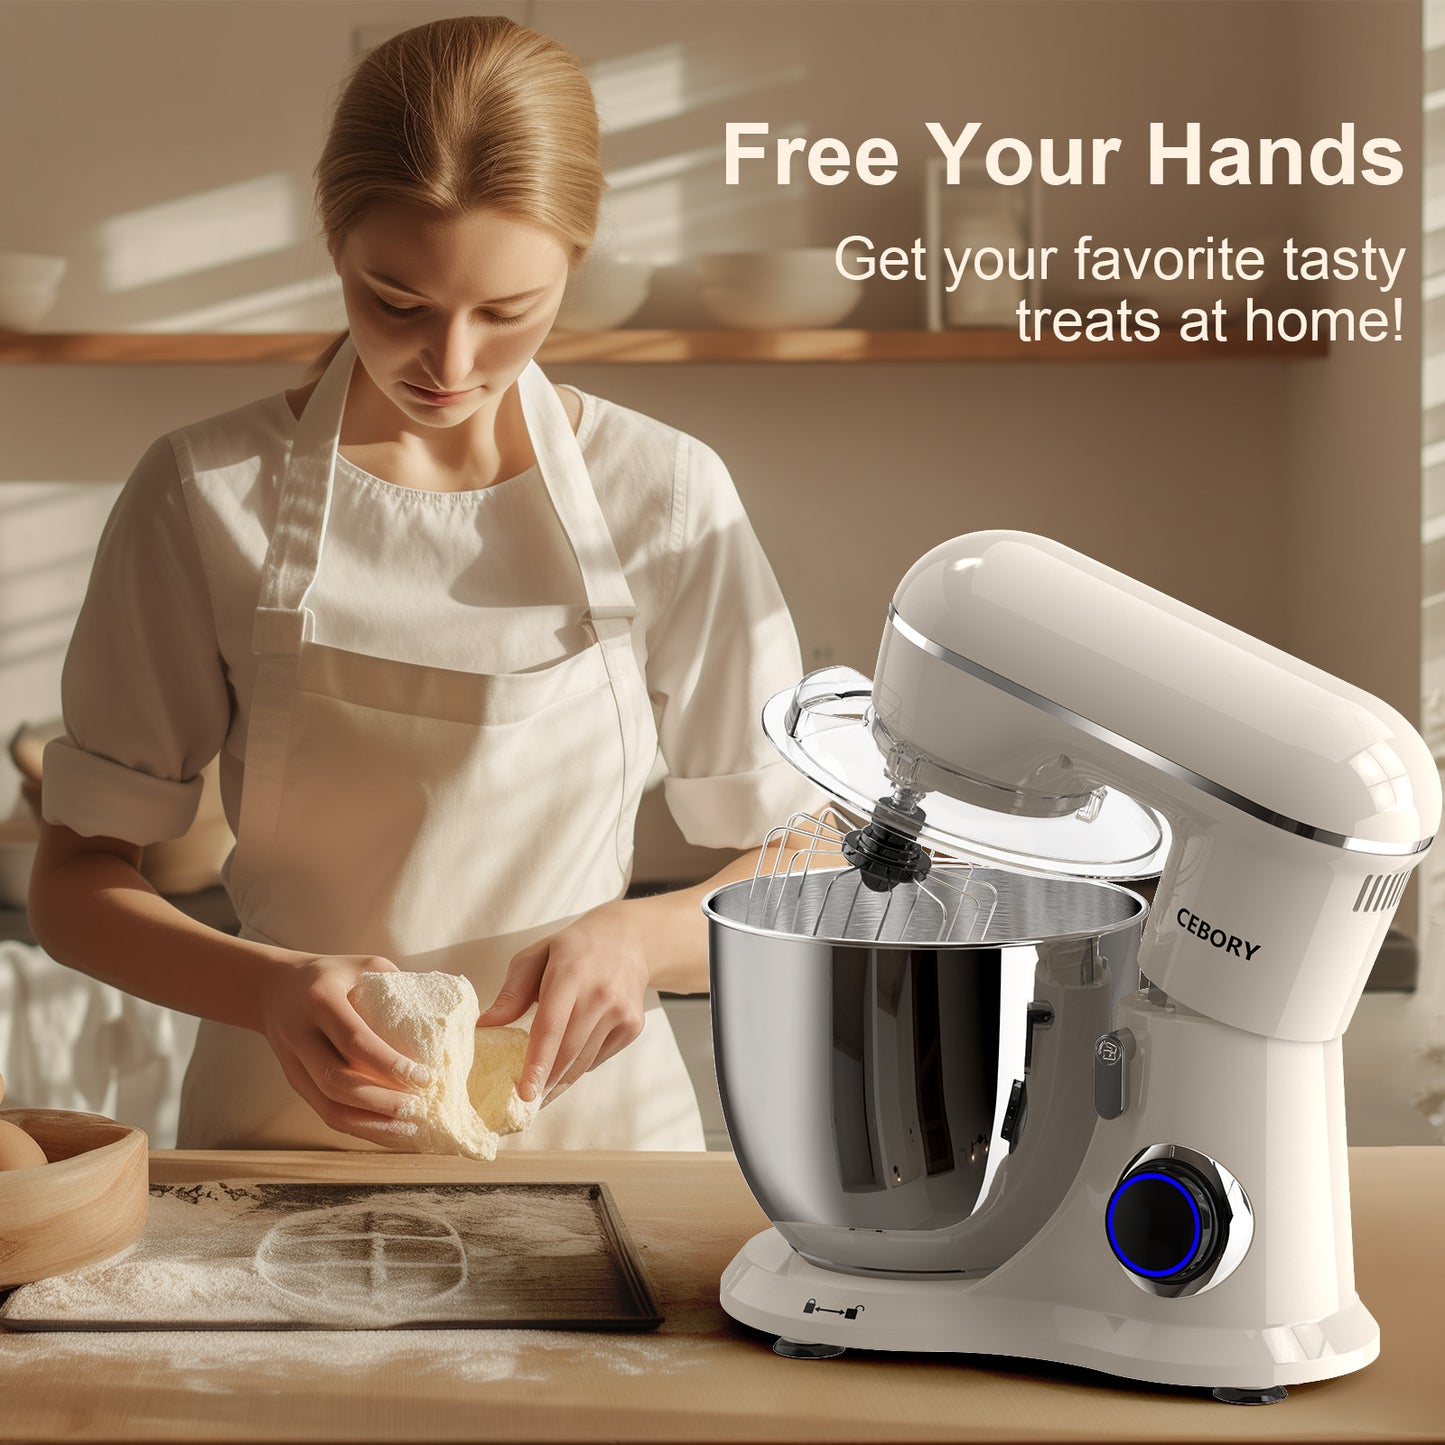 3-IN-1 Electric Stand Mixer, 660W 10-Speed With Pulse Button, Attachments Include 6.5QT Bowl, Dough Hook, Beater, Whisk For Most Home Cooks, Almond Cream